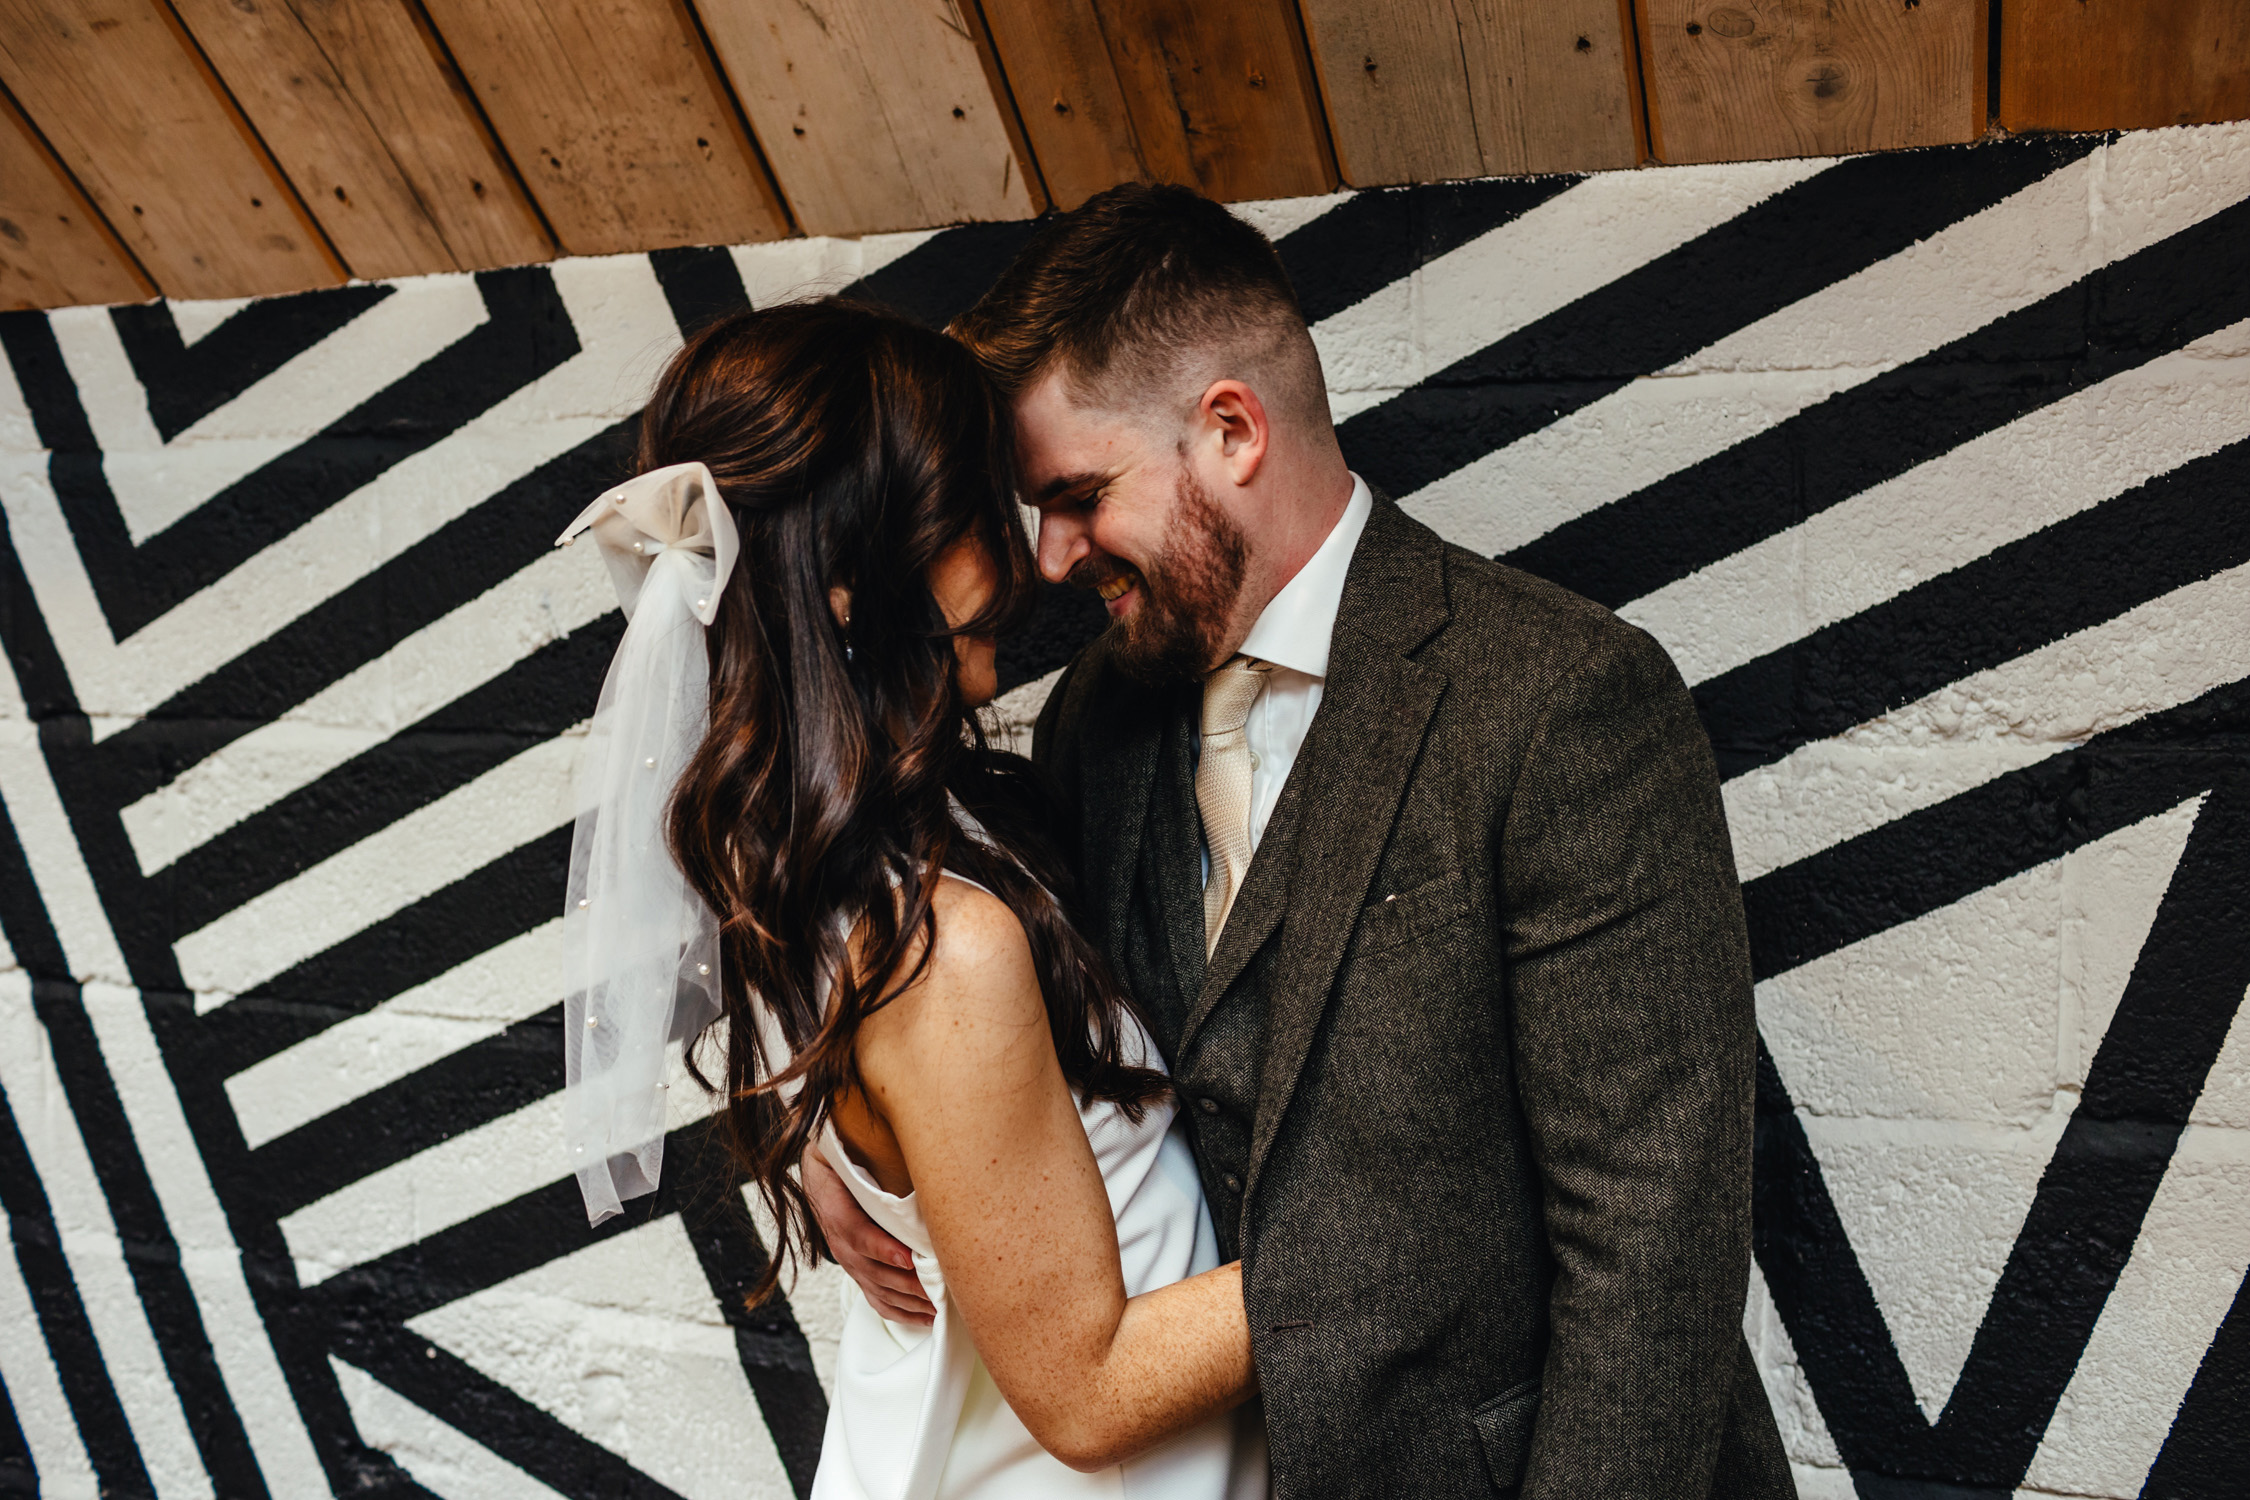 Bride and groom touching foreheads in an intimate pose in front of a geometric background